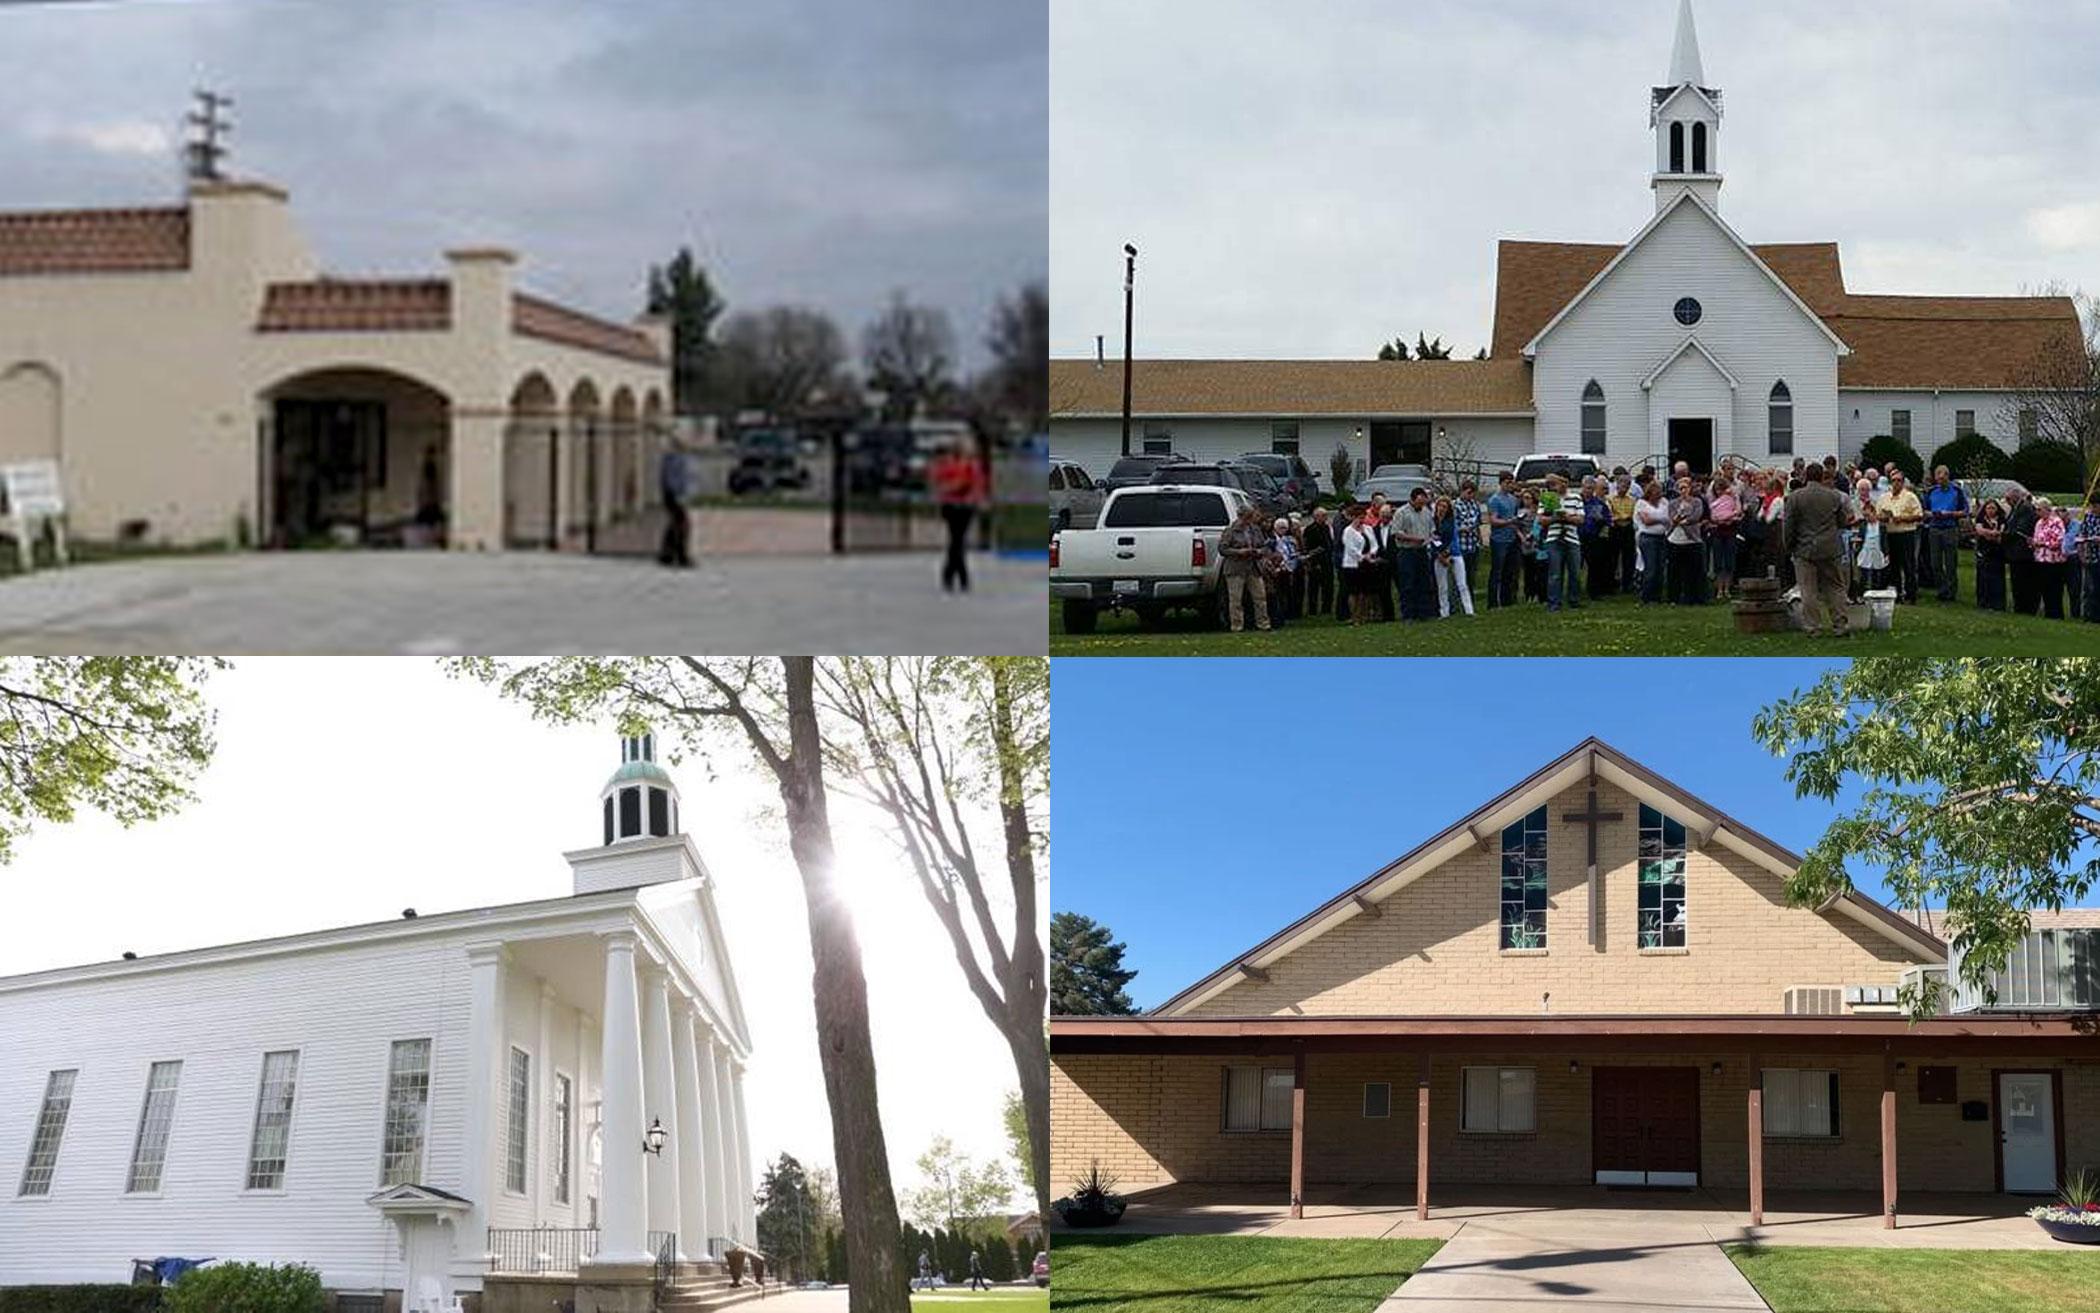 New Hope Community Church of Shafter (Calif.); Harrison (S.D.) Community Church; Pillar Church in Holland, Mich.; and Orangewood Community Church in Phoenix, Ariz., are four congregations that have affiliation with both the CRC and RCA denominations.